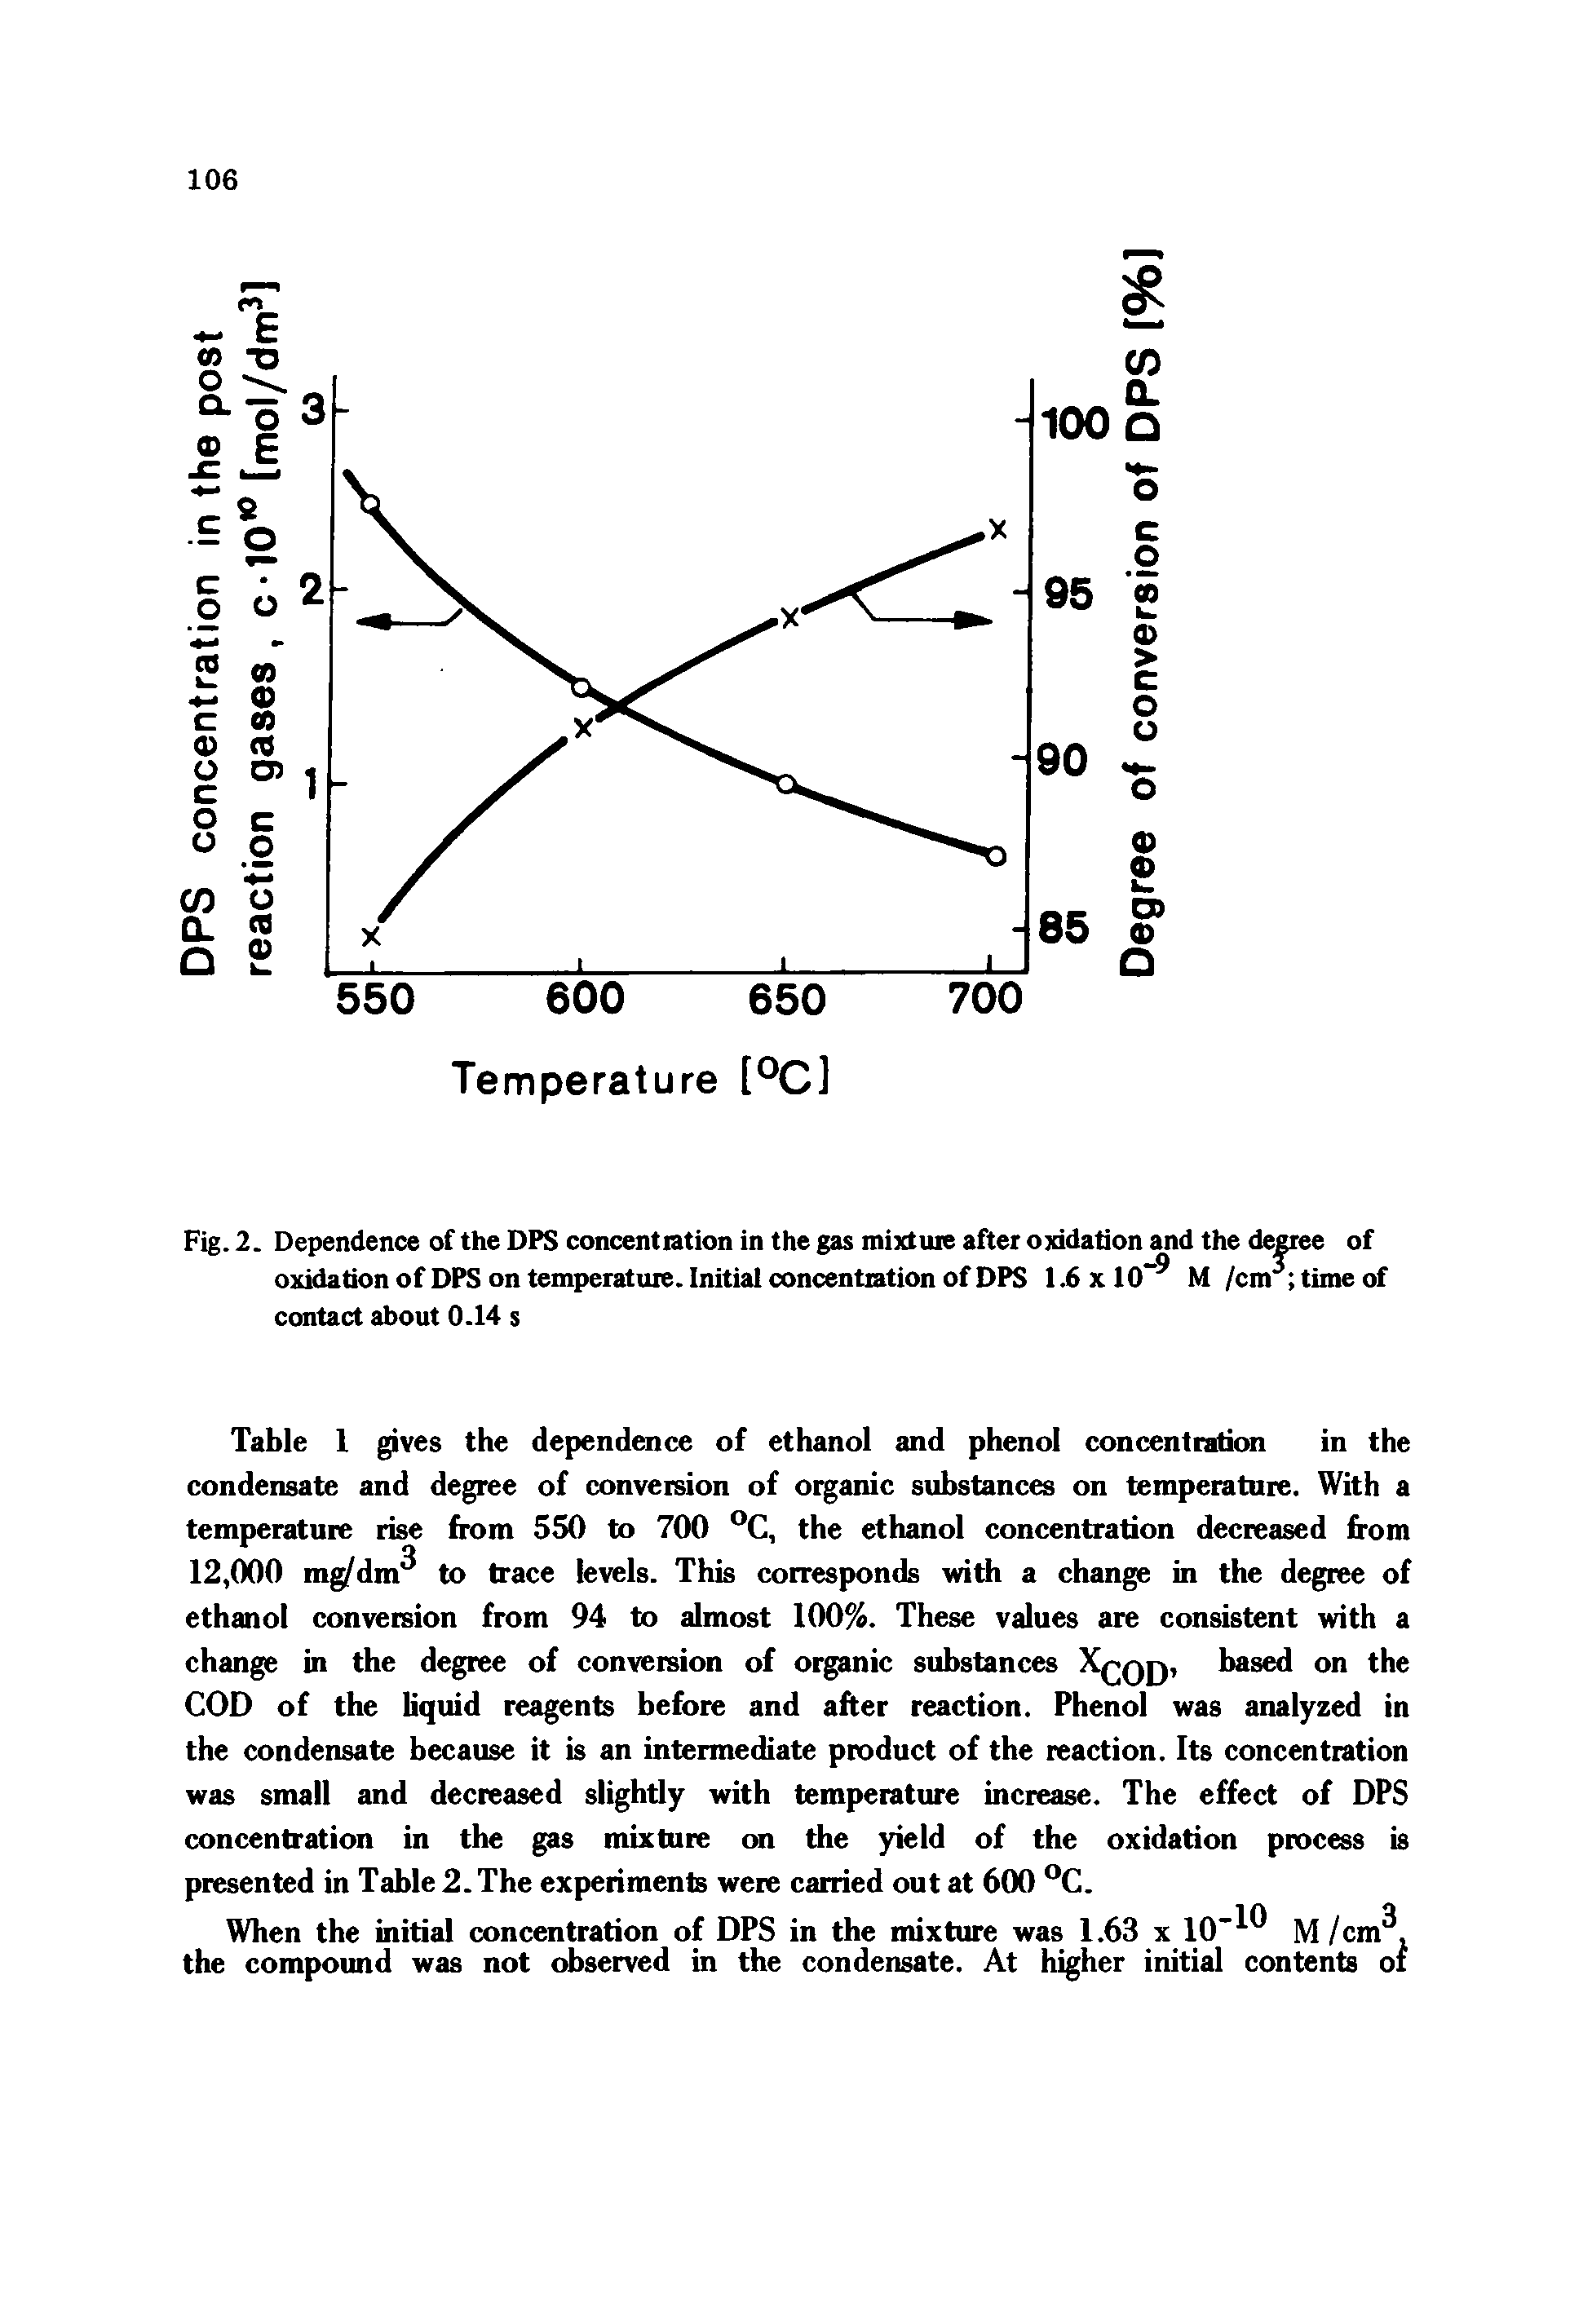 Table 1 gives the dependence of ethanol and phenol concentration in the condensate and degree of conversion of organic substances on temperature. With a temperature rise from 550 to 700 the ethanol concentration decreased from 12,000 mg dm to trace levels. This corresponds with a change in the degree of ethanol conversion from 94 to almost 100%. These values are consistent with a chan in the degree of conversion of organic substances Xqqq, based on the COD of the liquid reagents before and after reaction. Phenol was analyzed in the condensate because it is an intermediate product of the reaction. Its concentration was small and decreased slightly with temperature increase. The effect of DPS concentration in the gas mixture on the yield of the oxidation process is presented in Table 2. The experiments were carried out at 600 C.